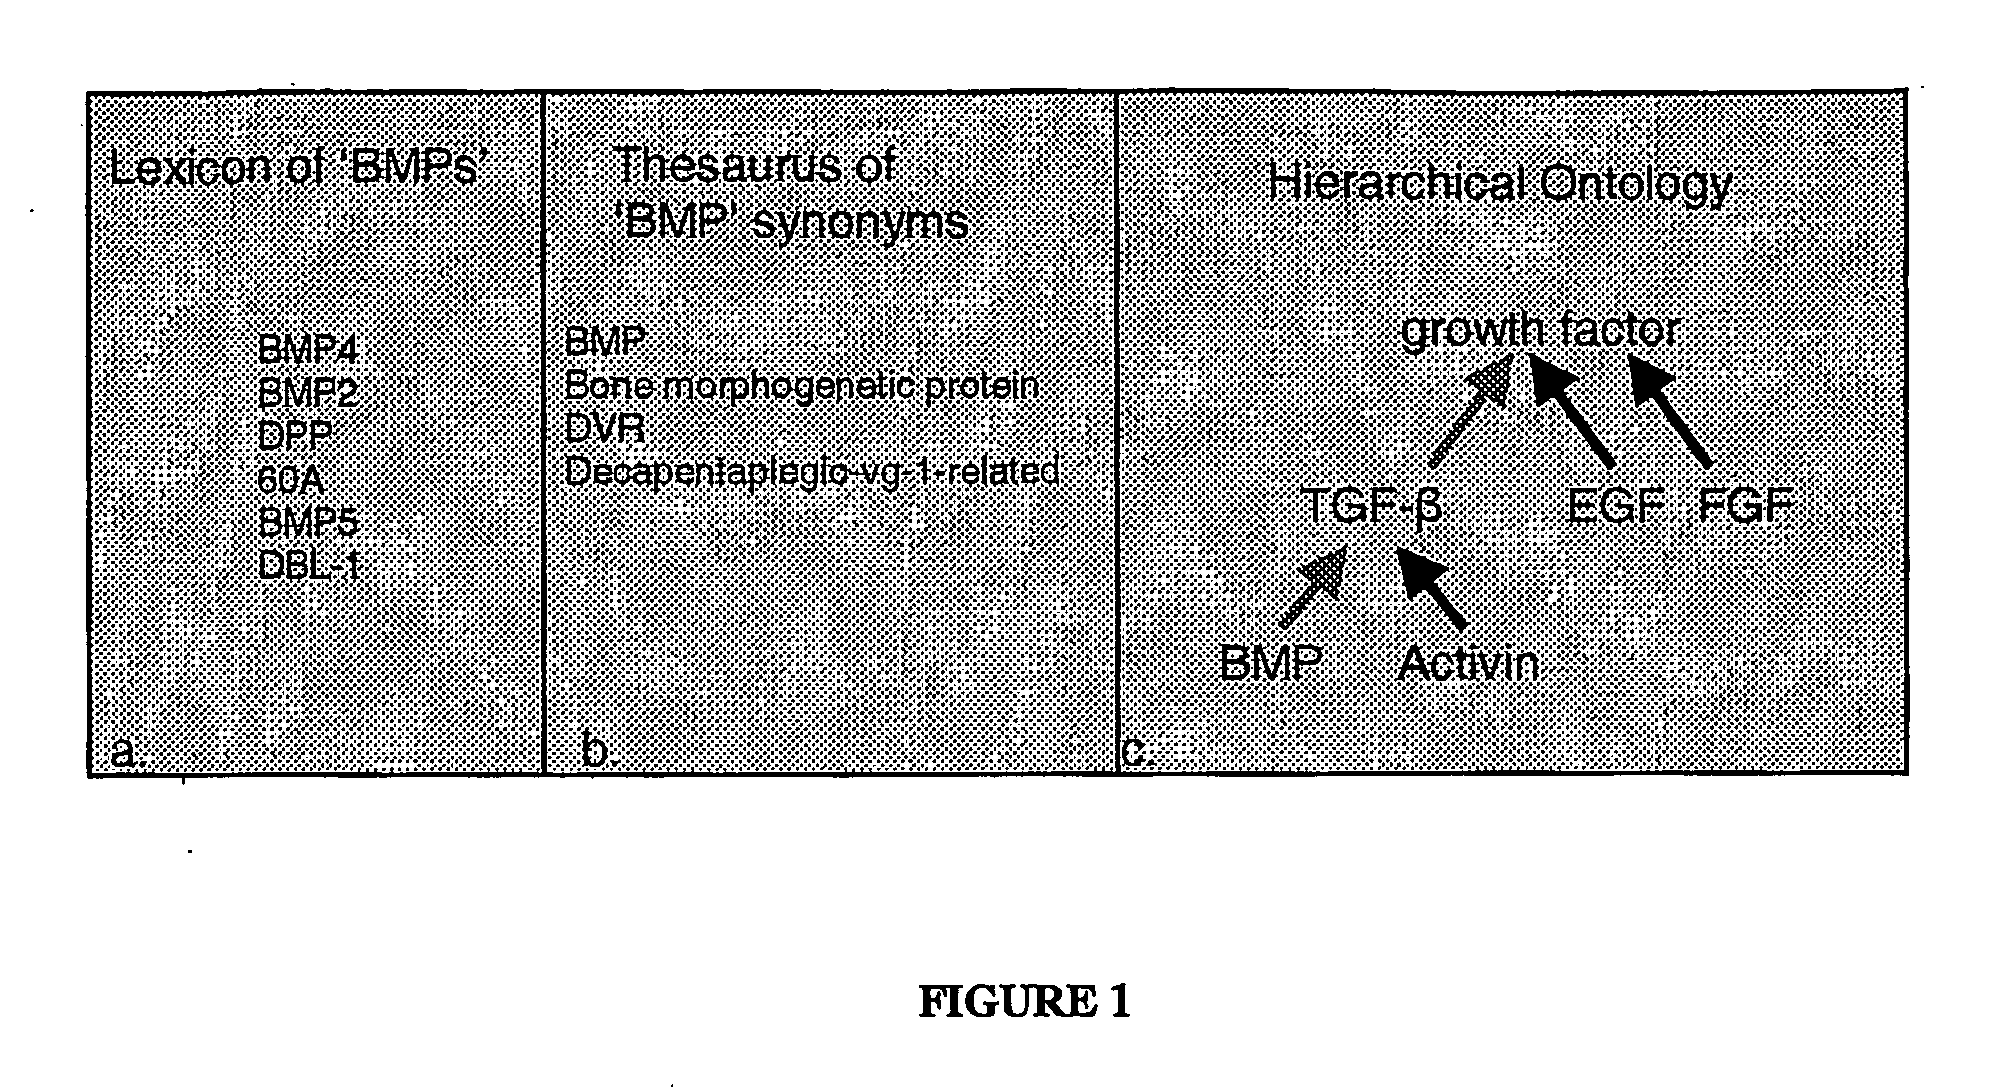 Methods of selection, reporting and analysis of genetic markers using borad-based genetic profiling applications